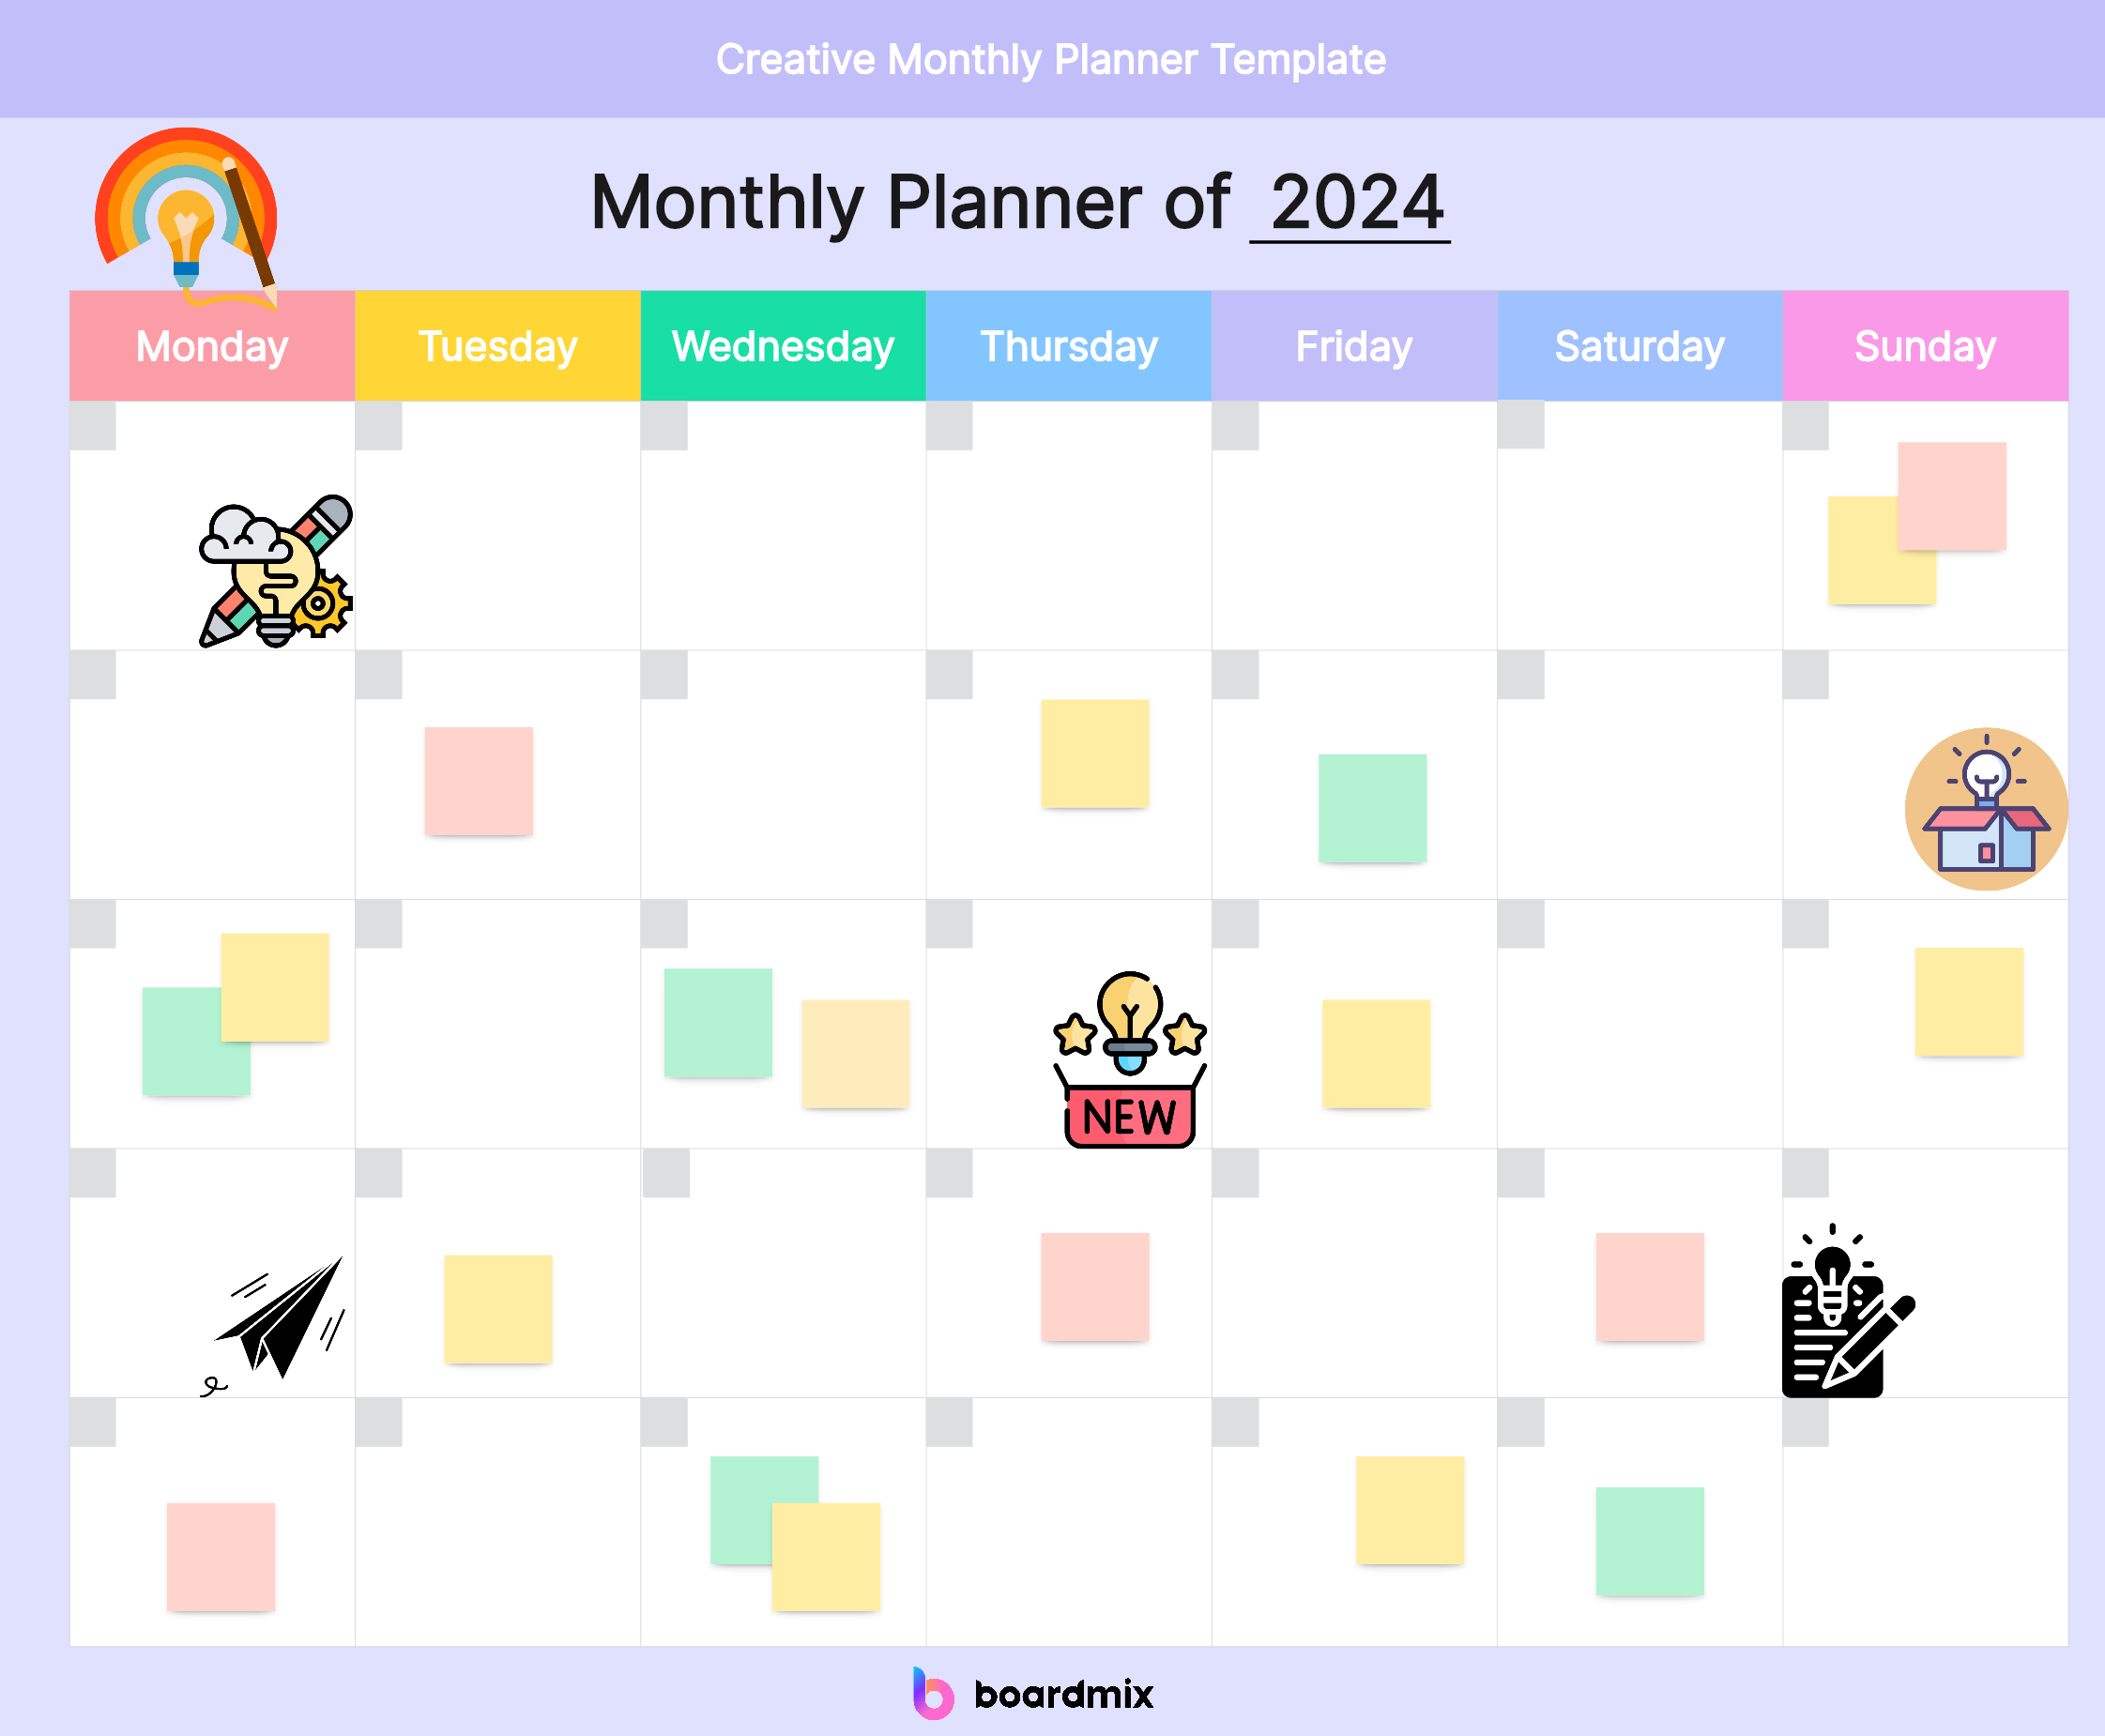 creative-monthly-planner-template.png